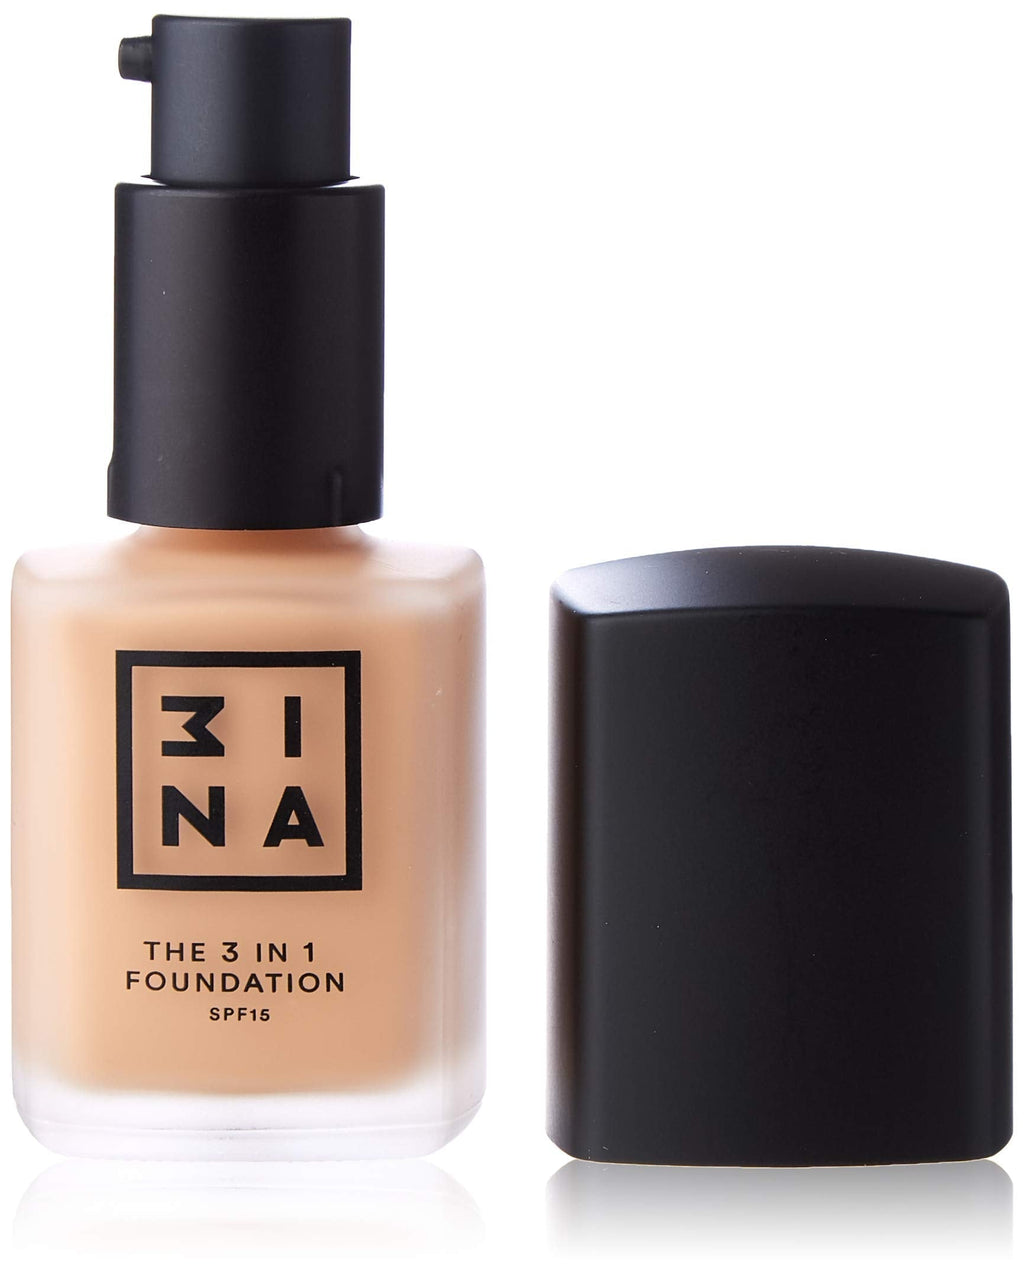 [Australia] - 3INA MAKEUP - Multifunctional Foundation Primes and Conceals - Medium Coverage - Natural Matte Finish - Long Lasting & Hydrating Formula - Vegan - The 3 in 1 Foundation 211 Natural Beige 